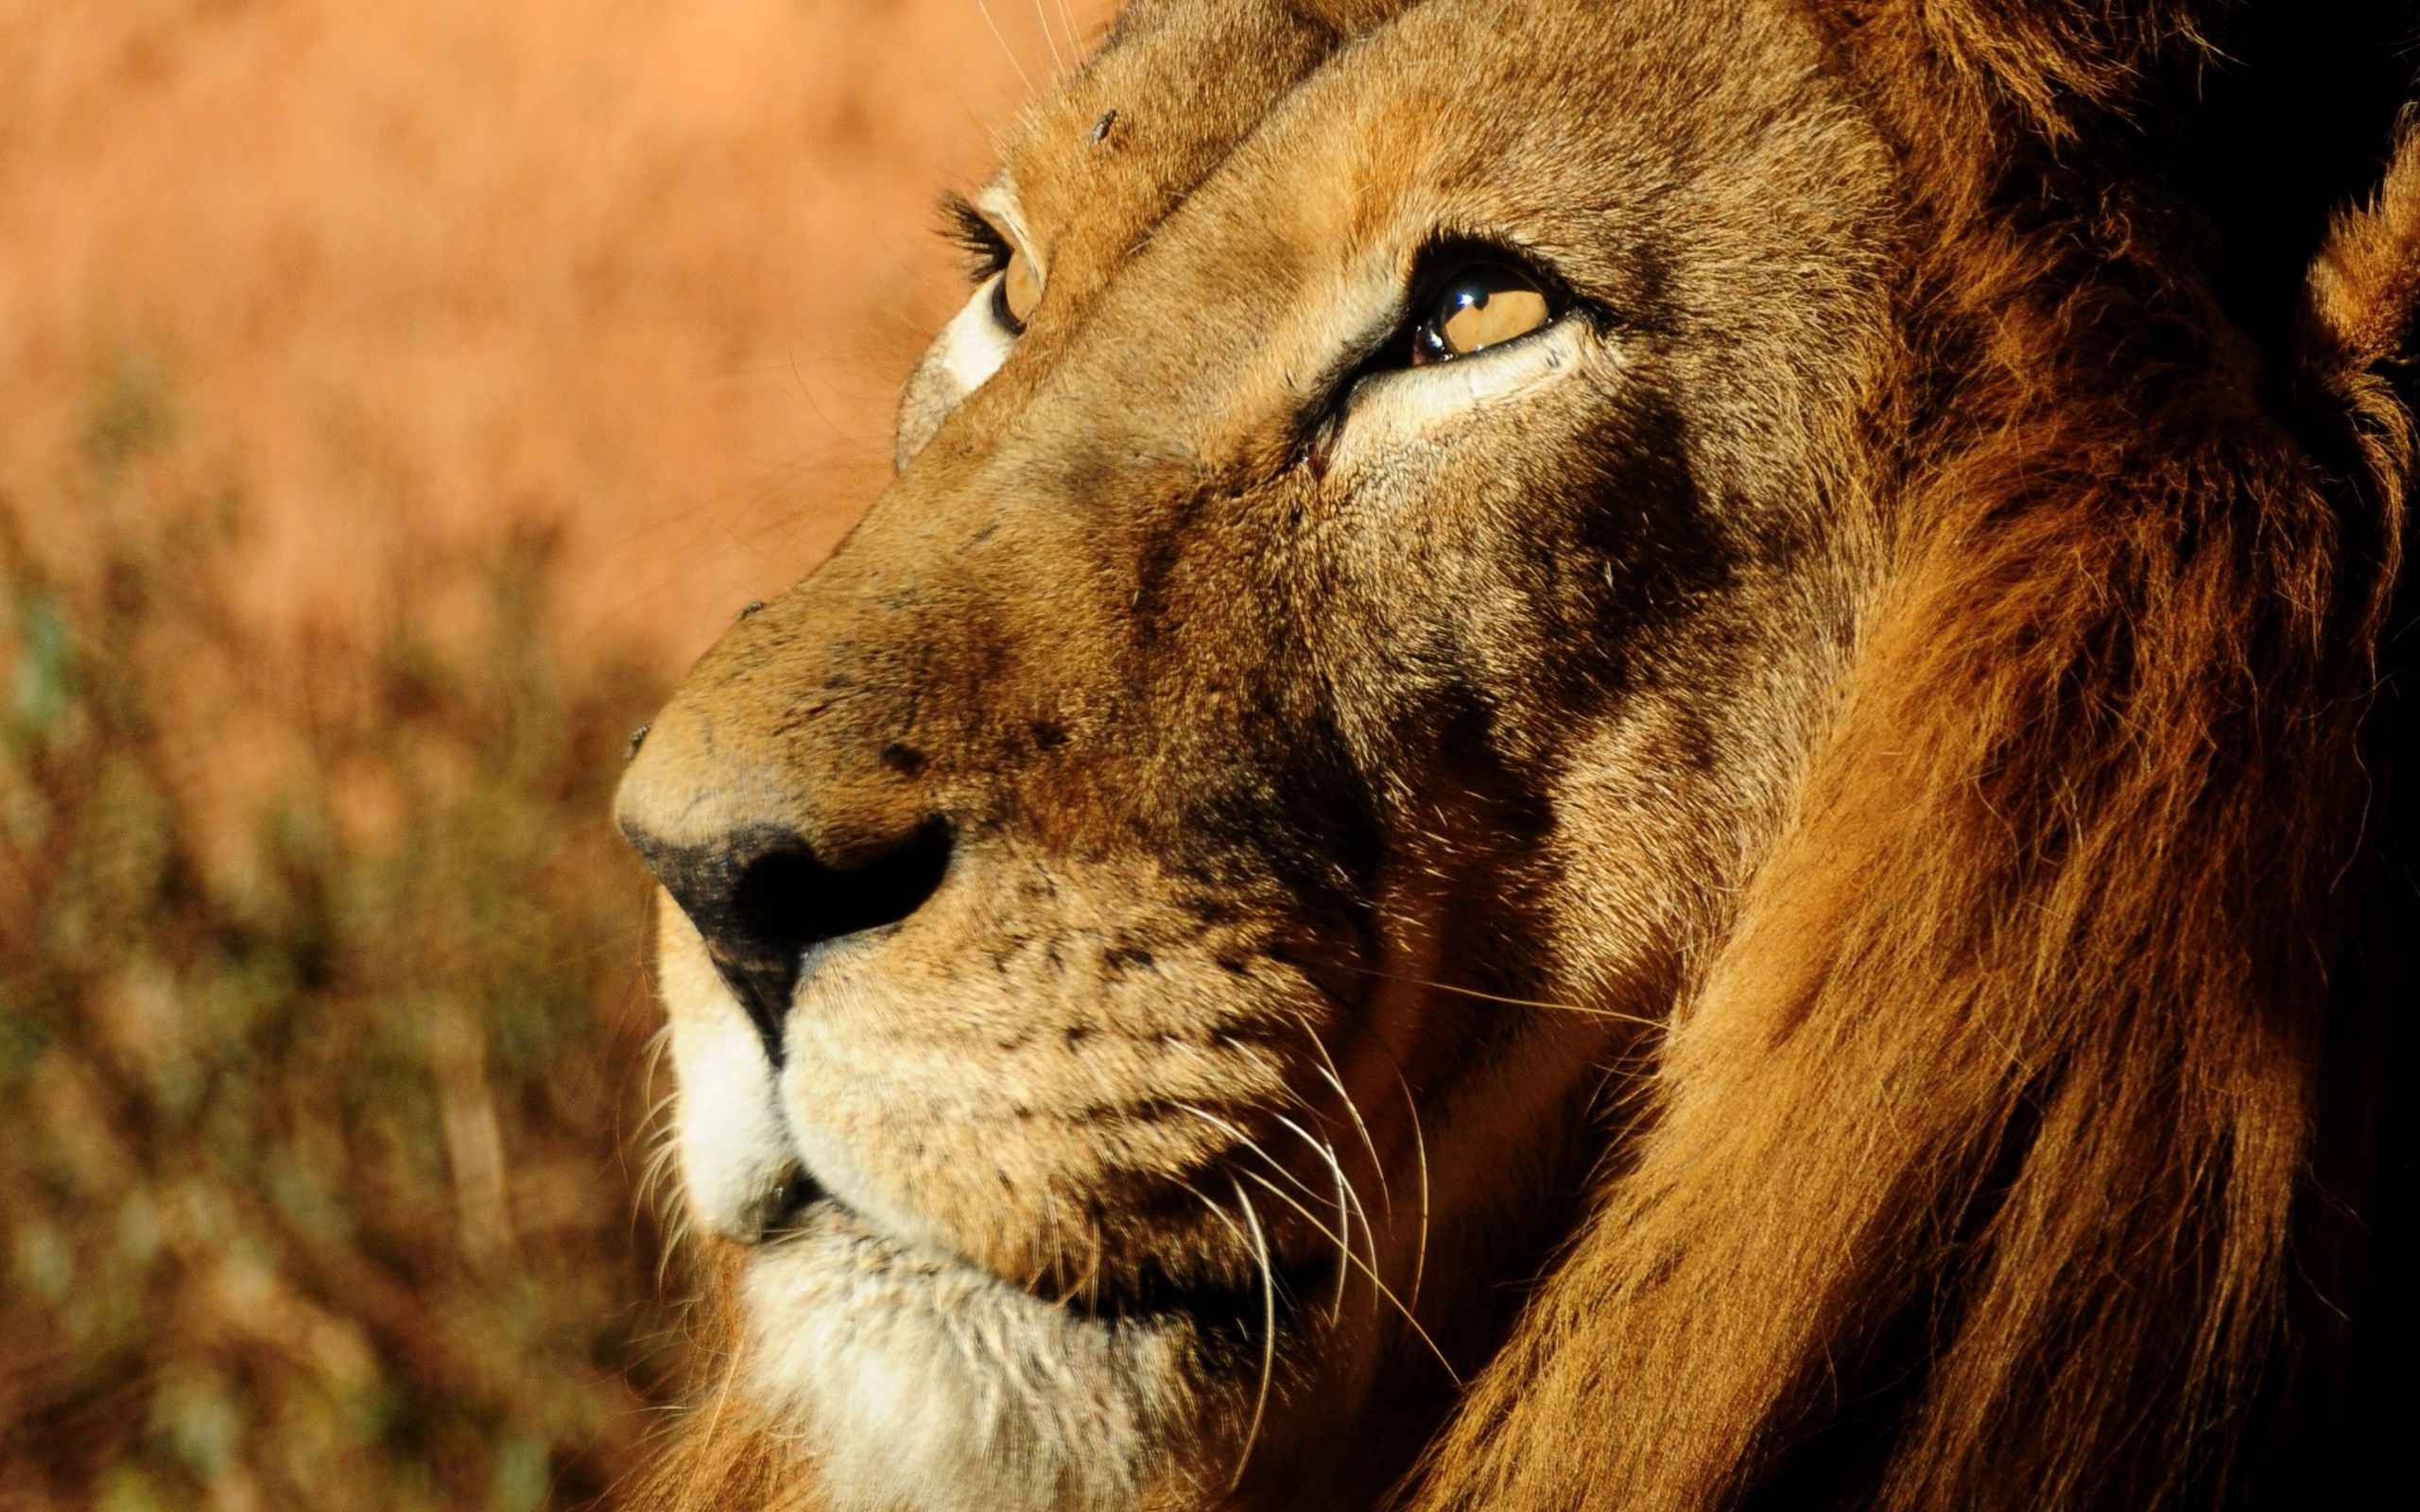 A close-up of the lion`s muzzle looking away